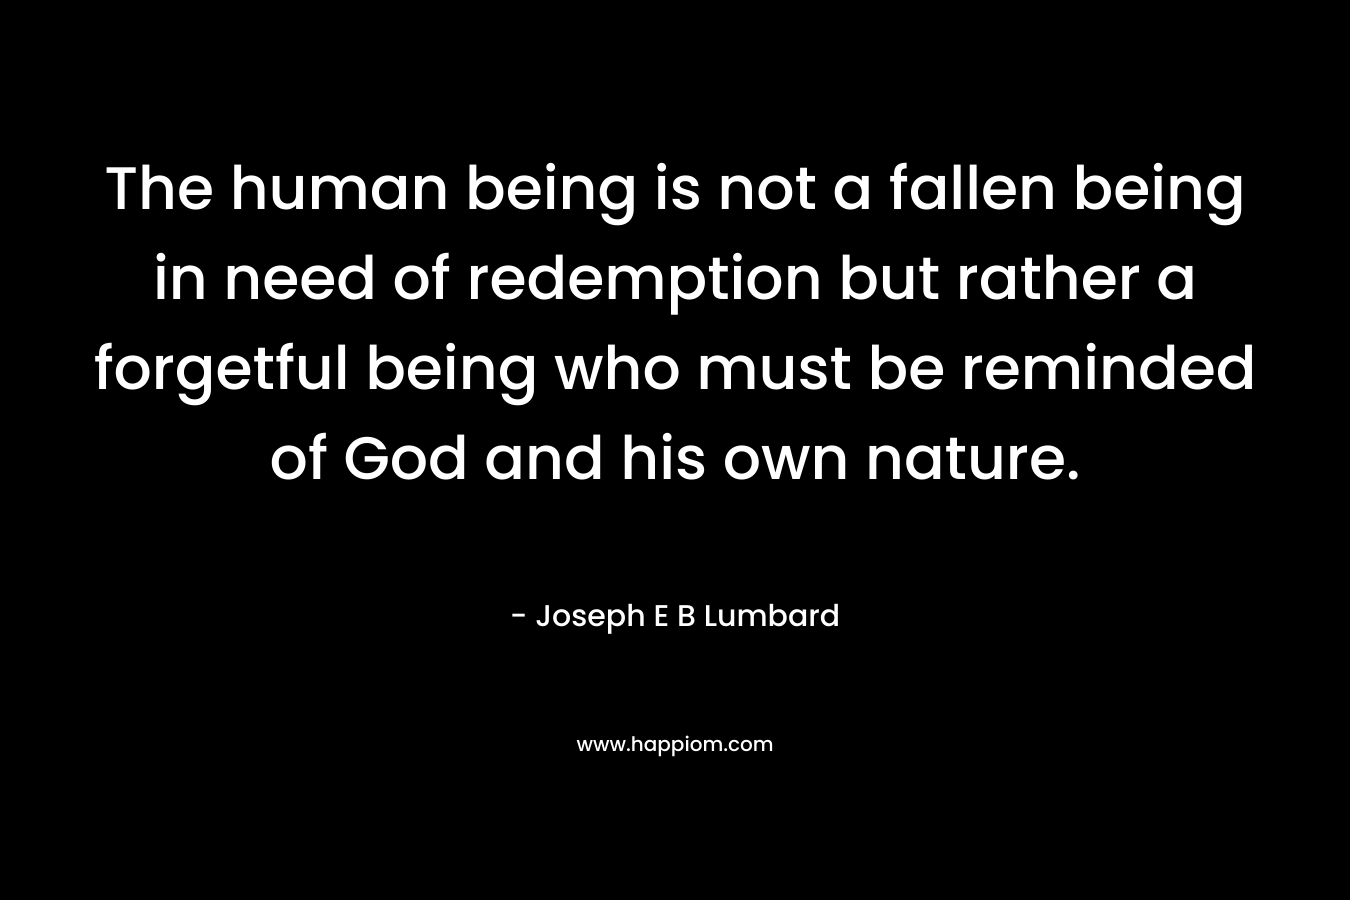 The human being is not a fallen being in need of redemption but rather a forgetful being who must be reminded of God and his own nature.